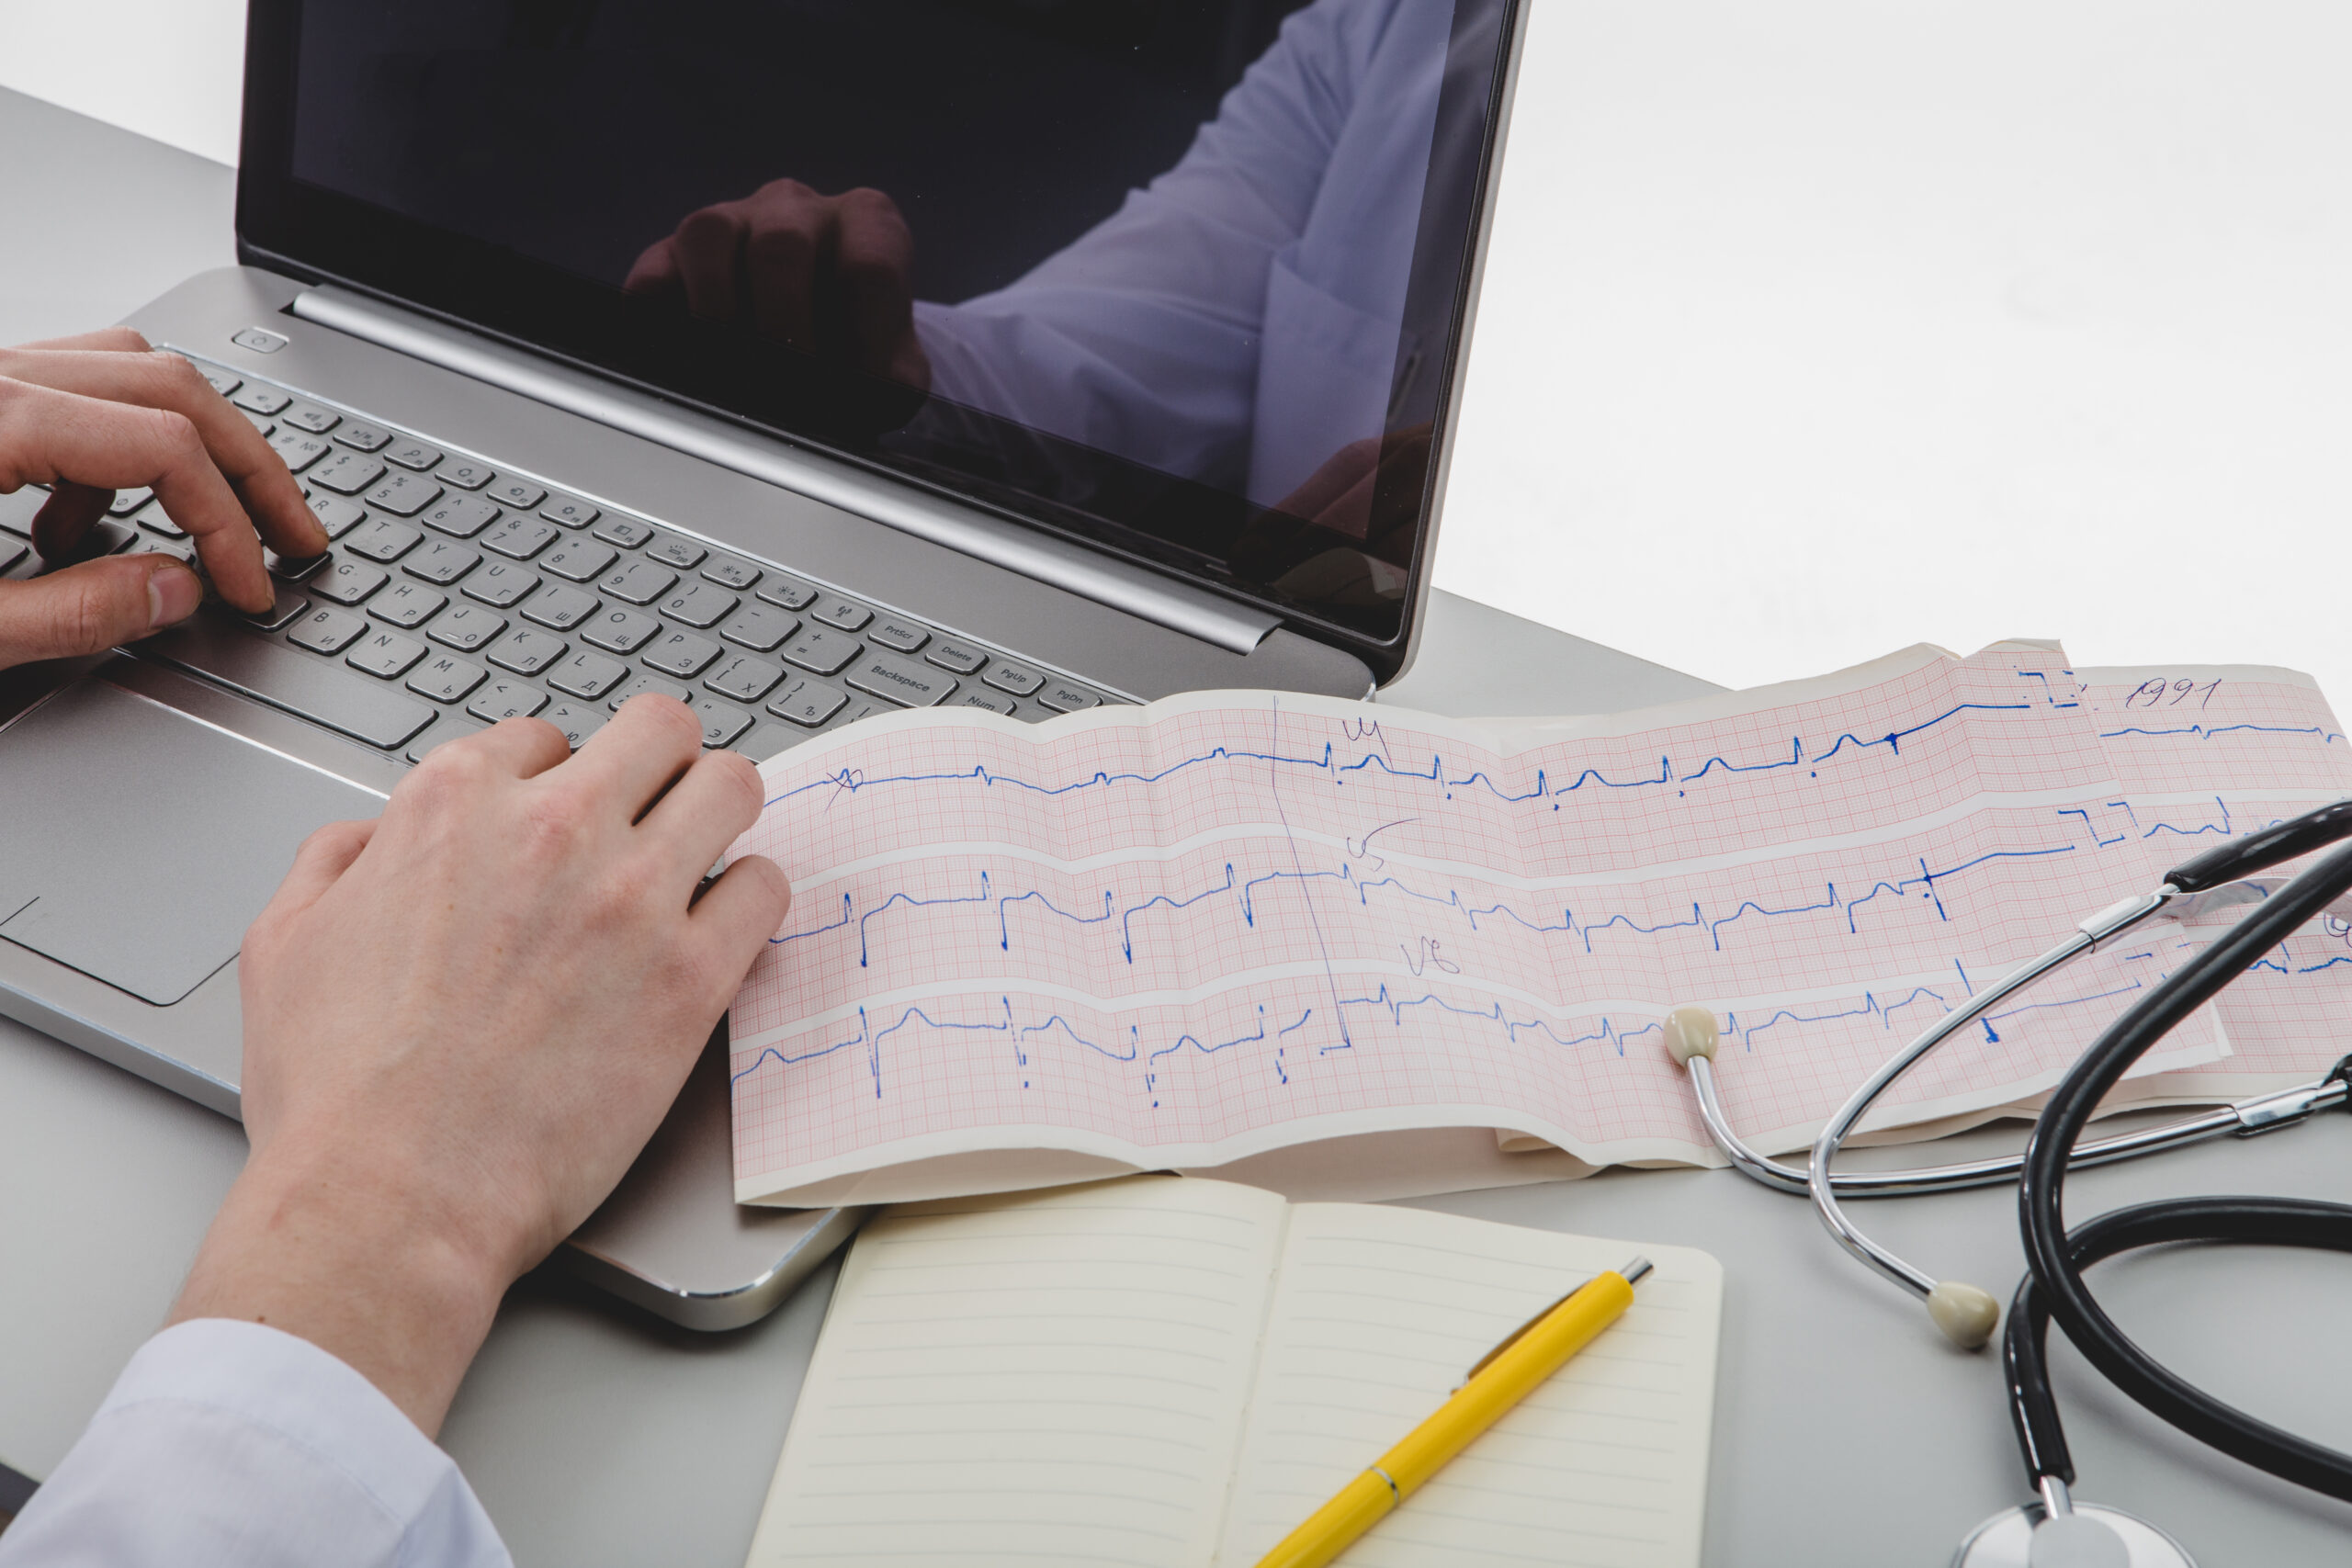 Angina: What Is, Causes, Symptoms, and Diagnosis